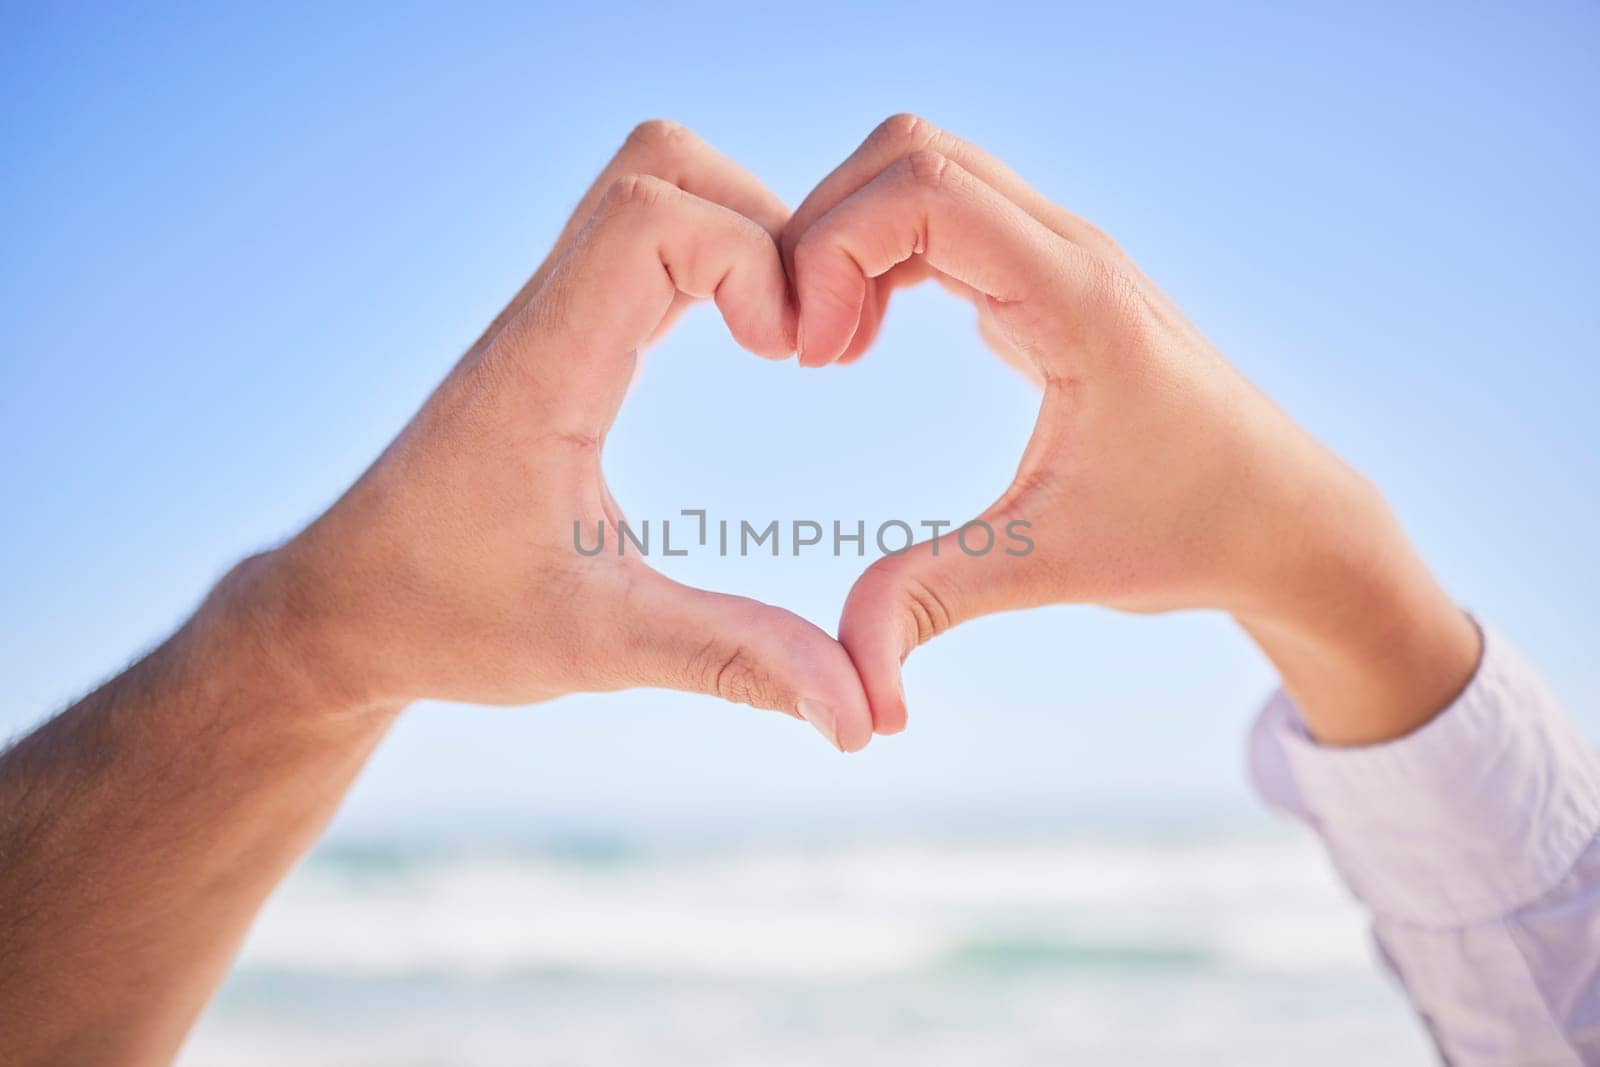 Love, hands or couple at beach with heart sign on holiday vacation or romantic honeymoon to celebrate marriage Commitment, trust or lovers showing hearty shape emoji or icon in fun summer romance.